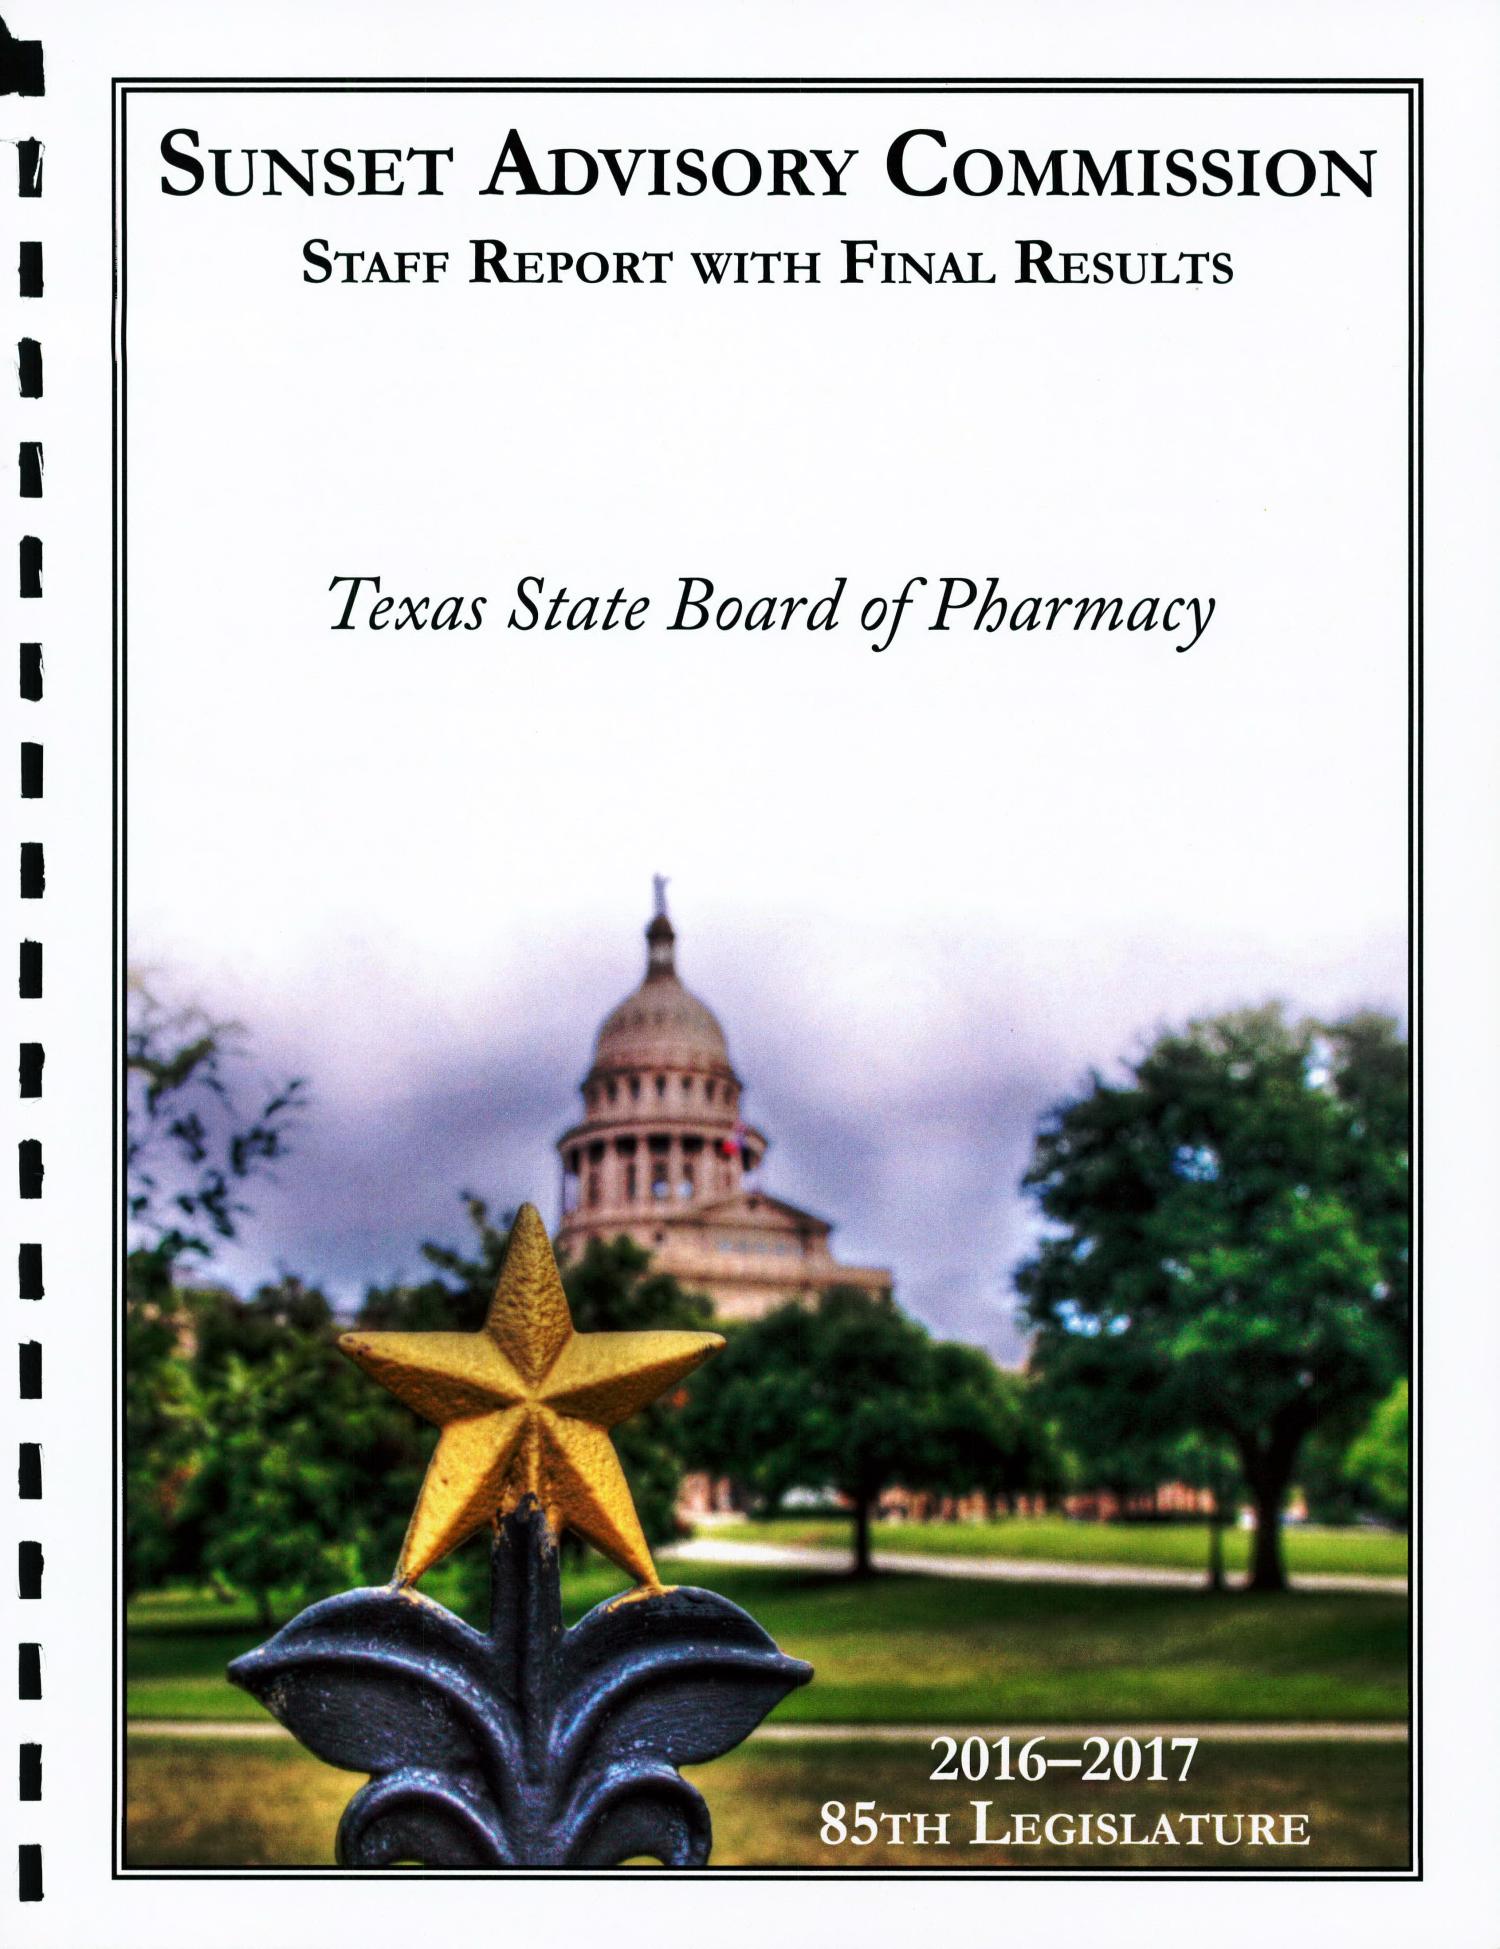 Staff Report with Final Results: Texas State Board of Pharmacy
                                                
                                                    Front Cover
                                                